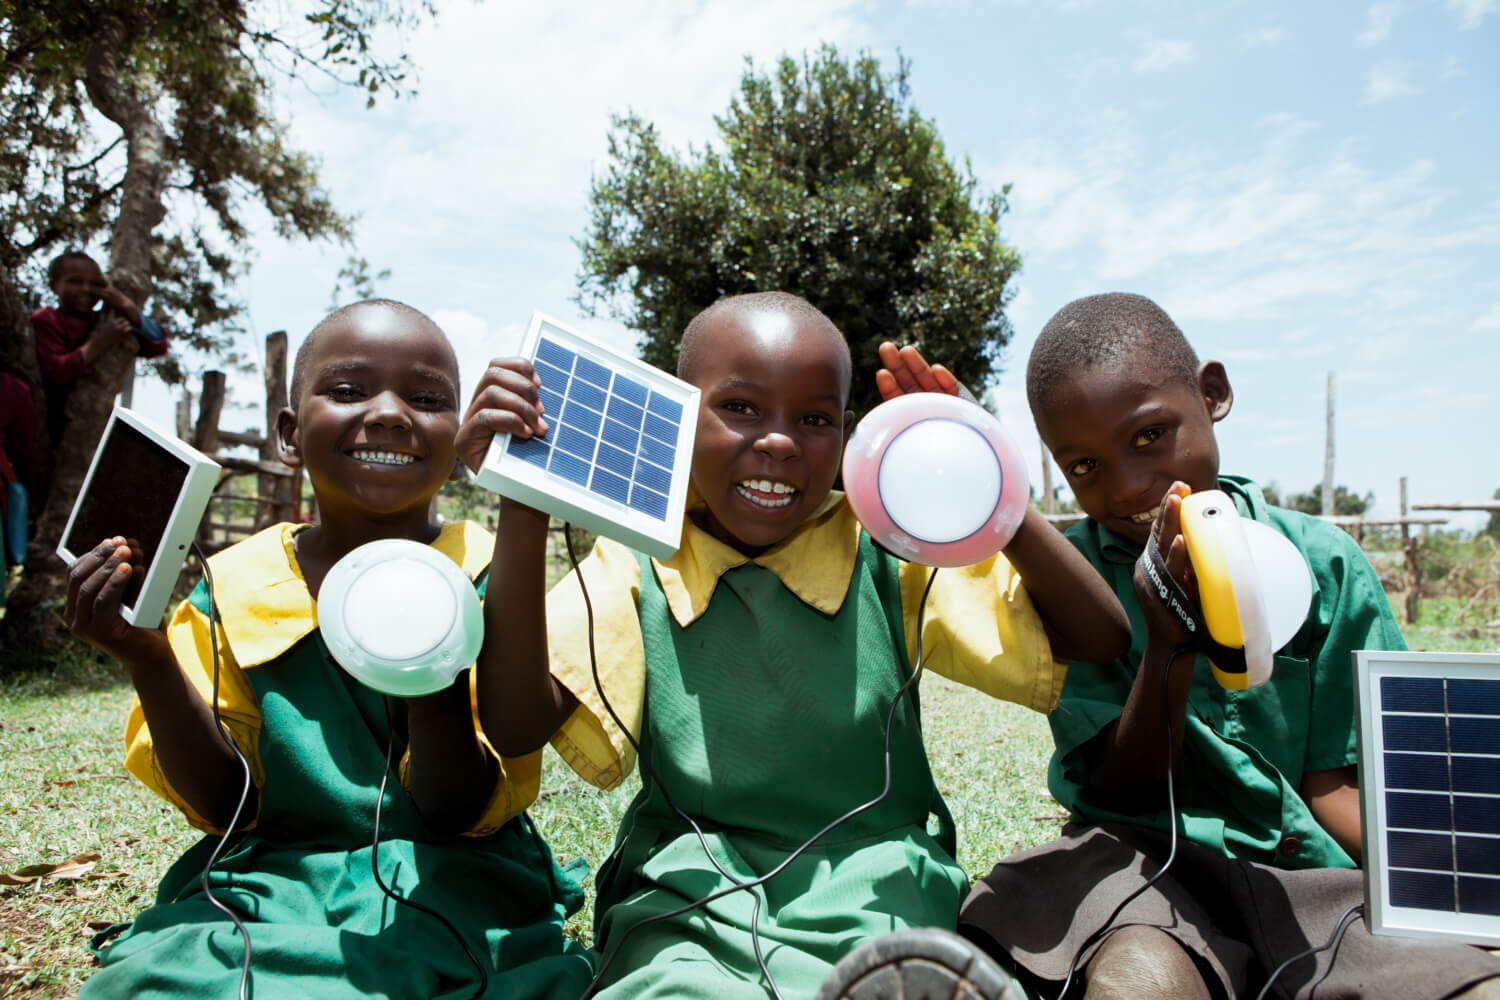 solar charity for clean water